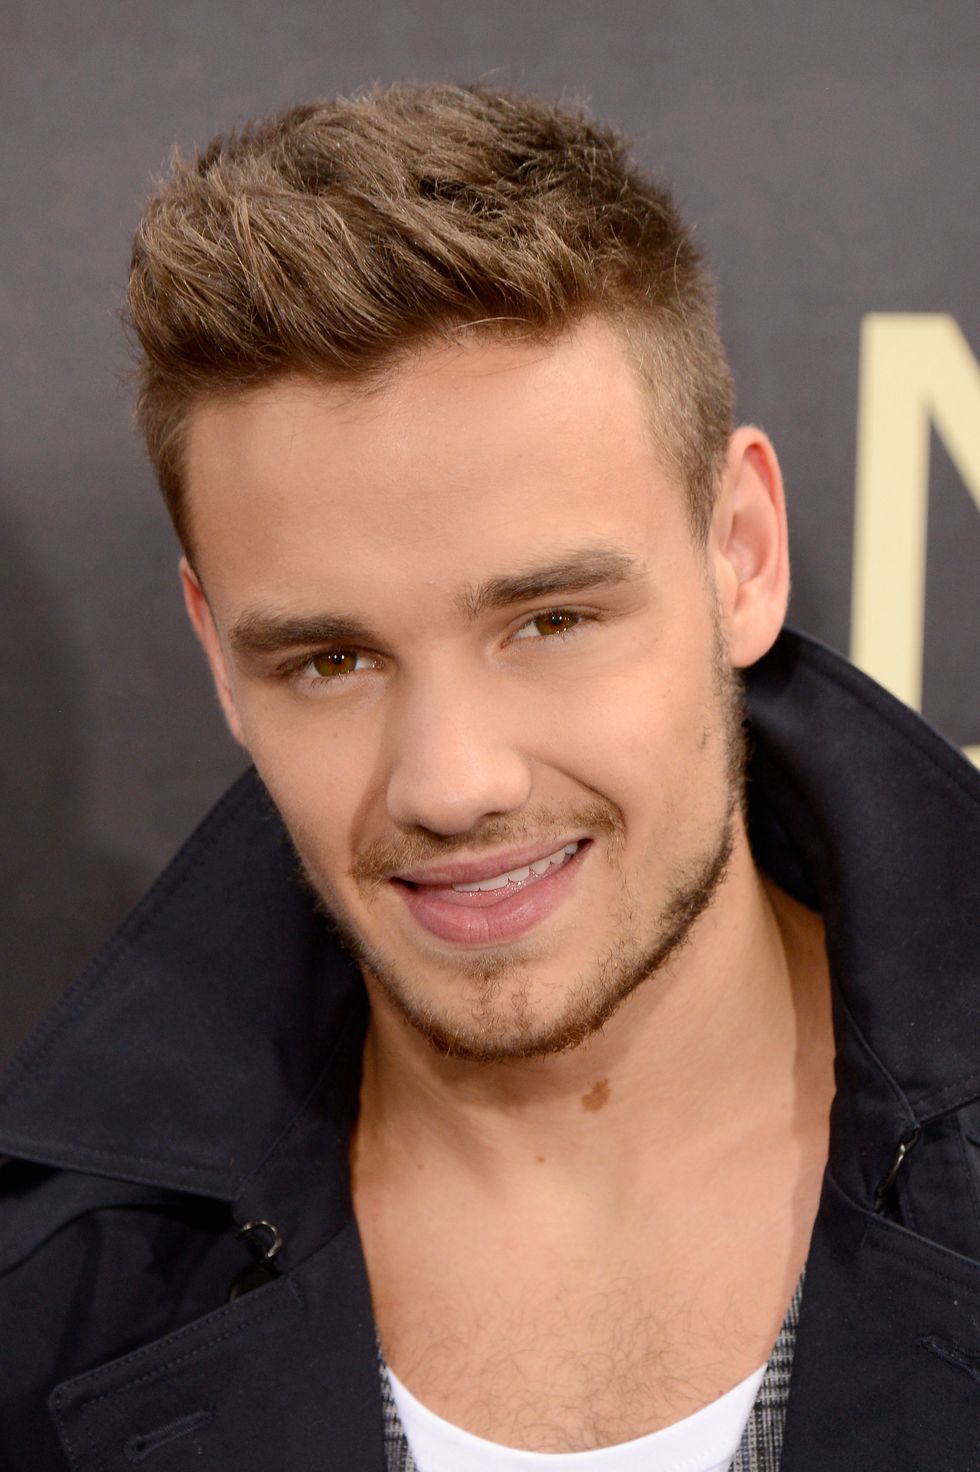 21 moments that made Liam Payne the hottest member of One Direction